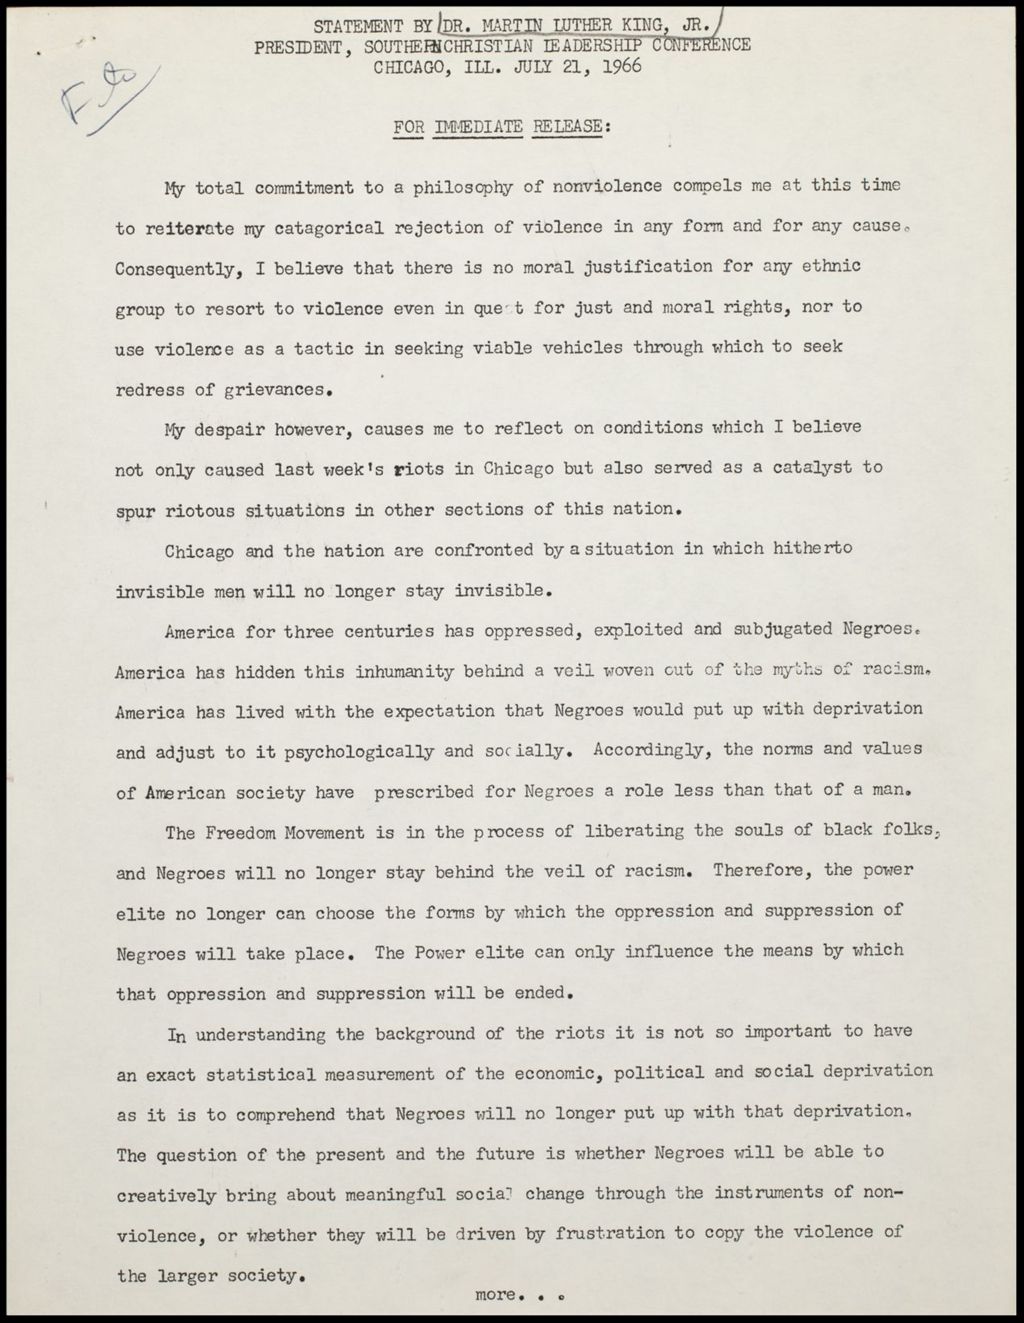 The Role of Martin Luther King Publications, 1965 (Folder III-2932)